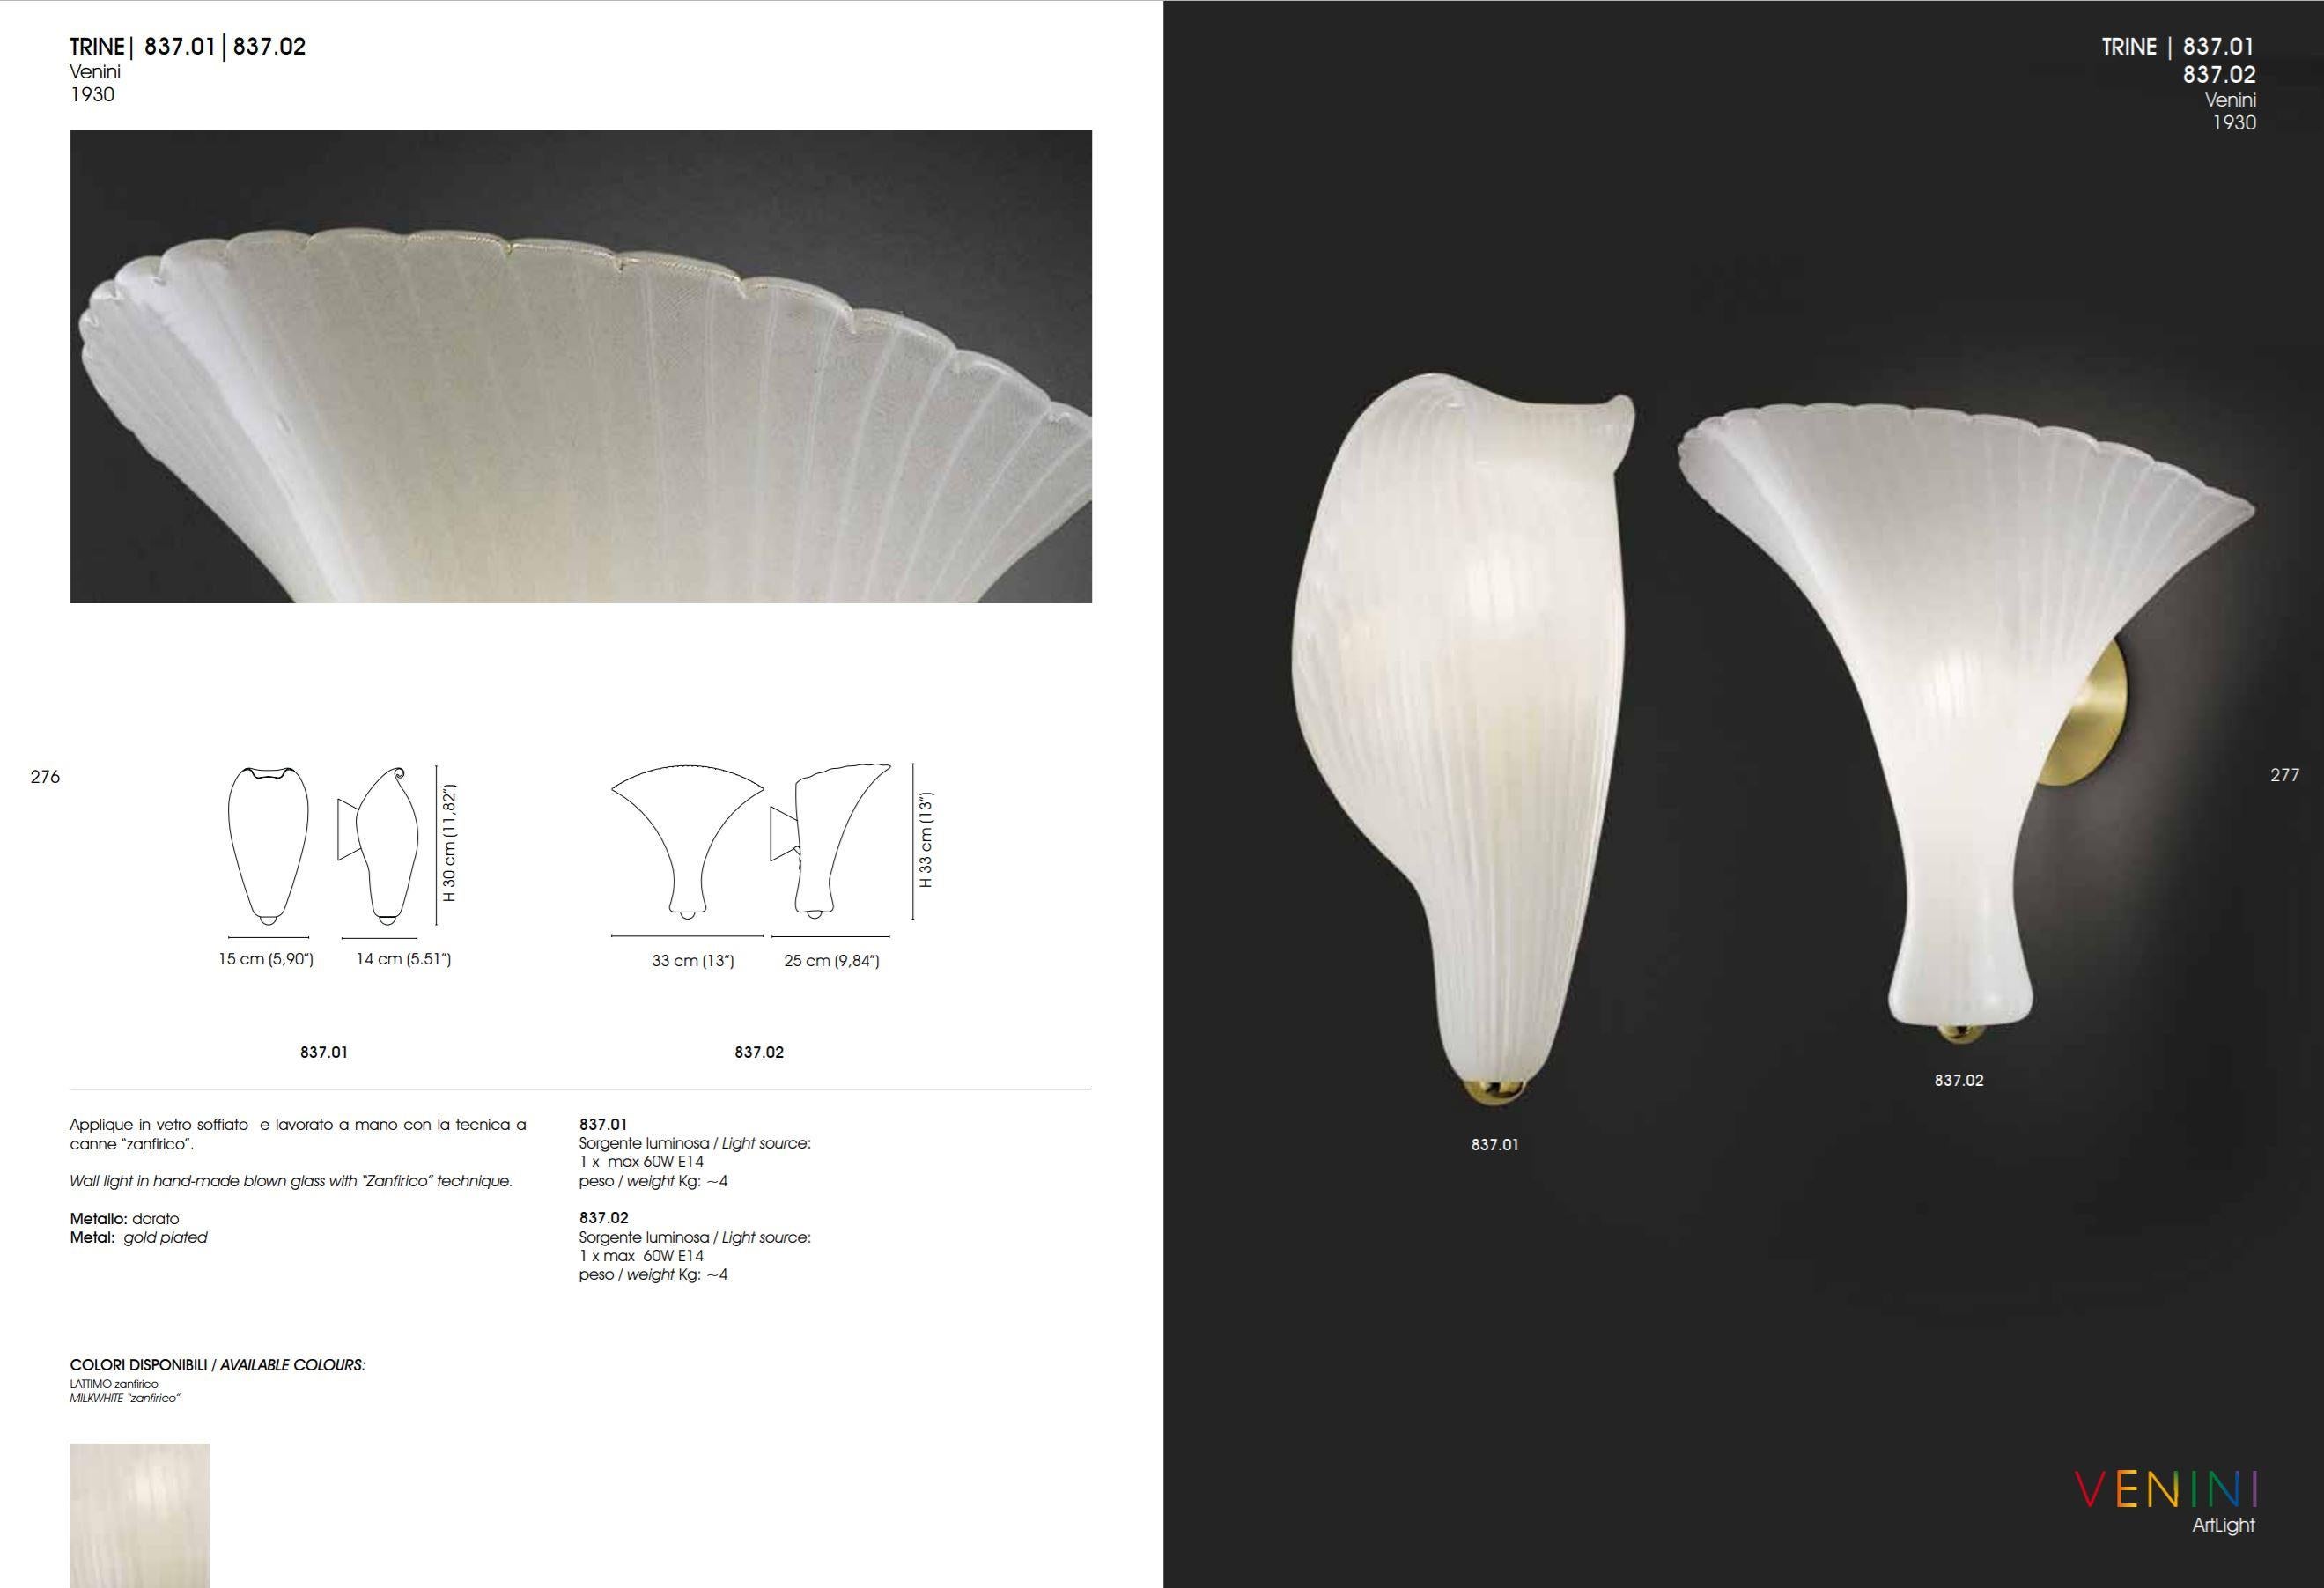 Semi-opaque white mouth-blown sculptural glass wall sconce, made in Italy by Venini. Venini was established in 1921 by Paolo Venini, a Milanese lawyer, and Giacomo Cappellin, a Venetian antiquarian. Venini’s master glass-makers create these